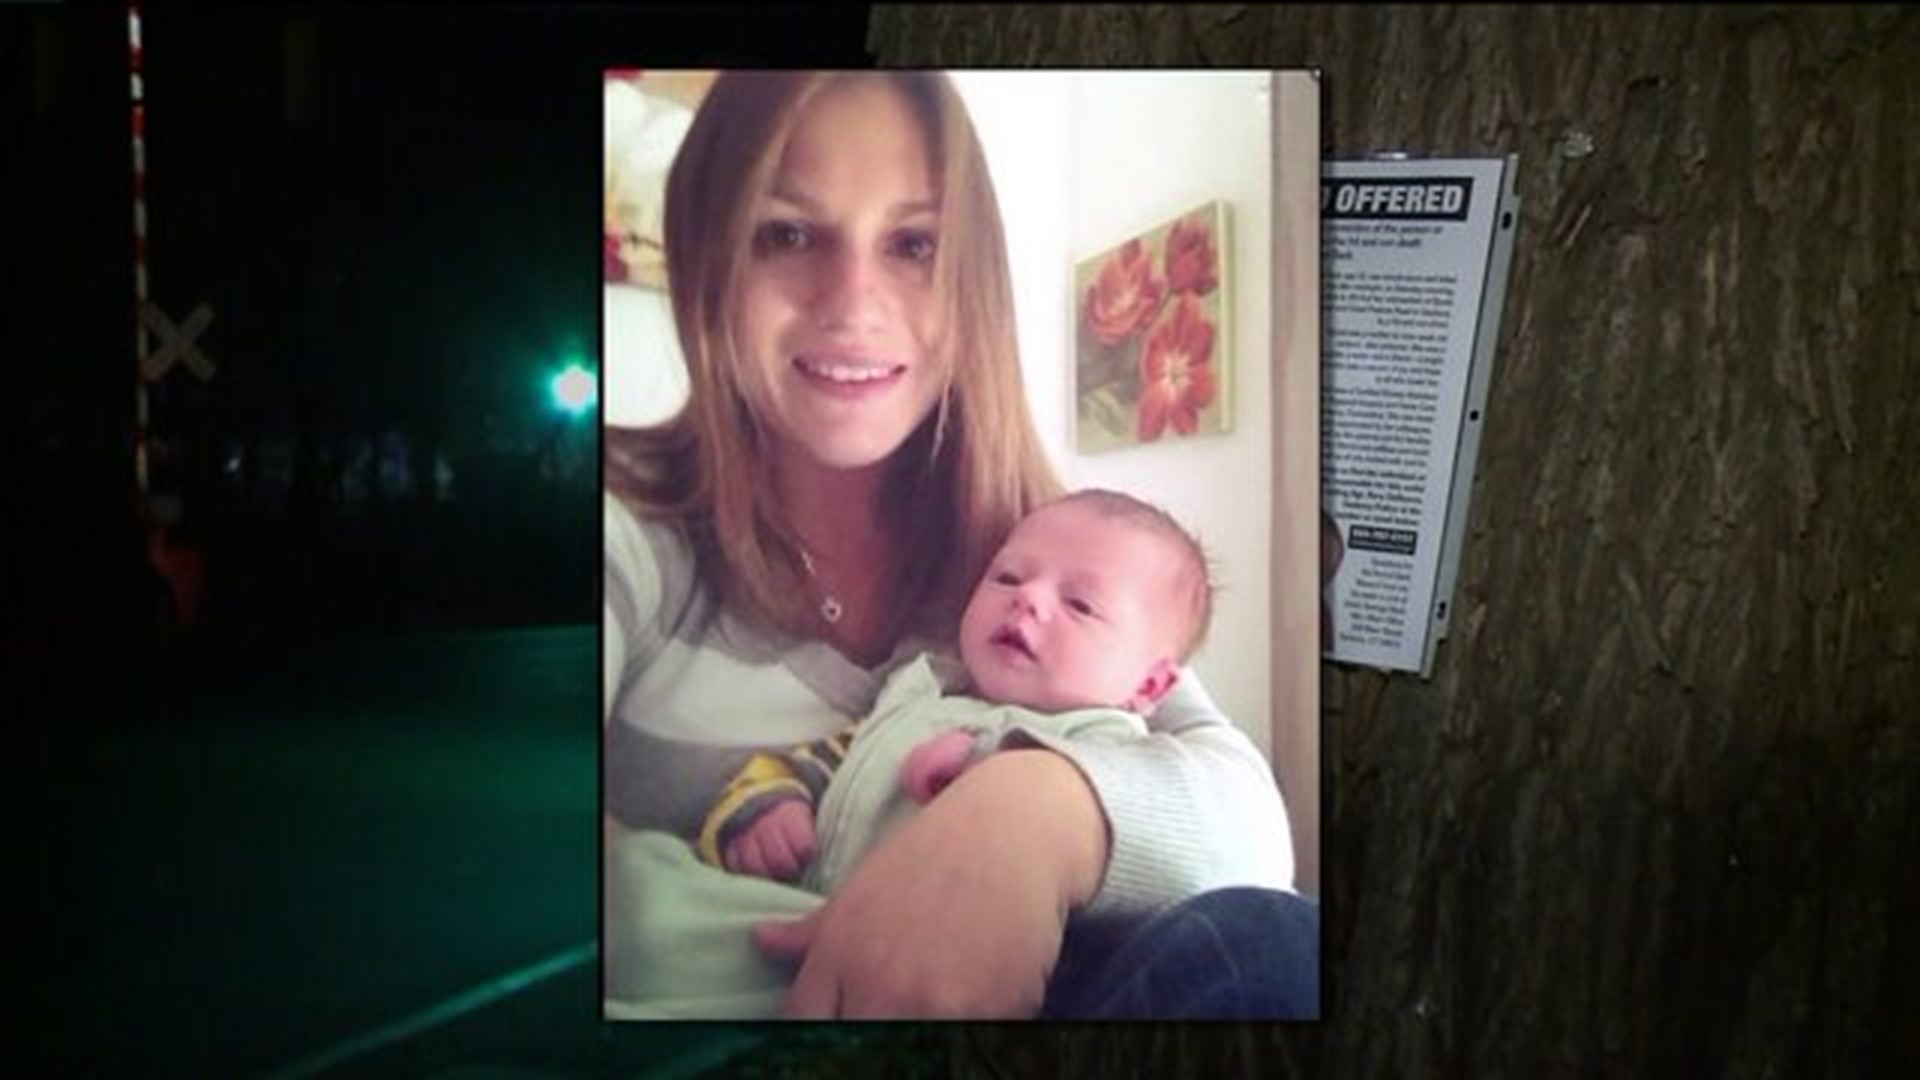 Scholarship fund set up for baby after mother killed in hit-and-run